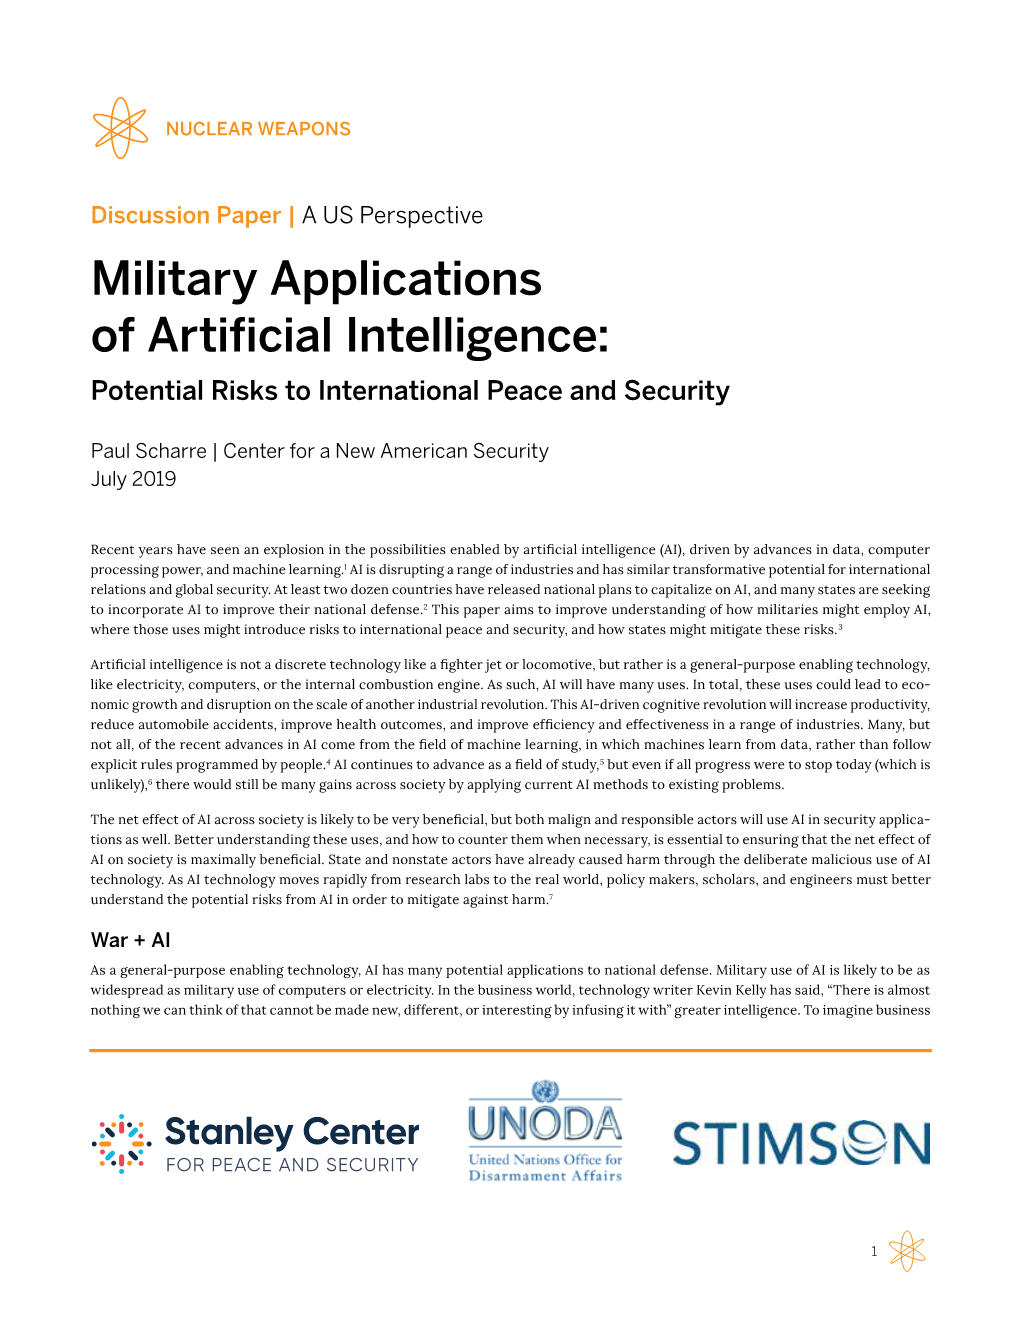 Military Applications of Artificial Intelligence: Potential Risks to International Peace and Security